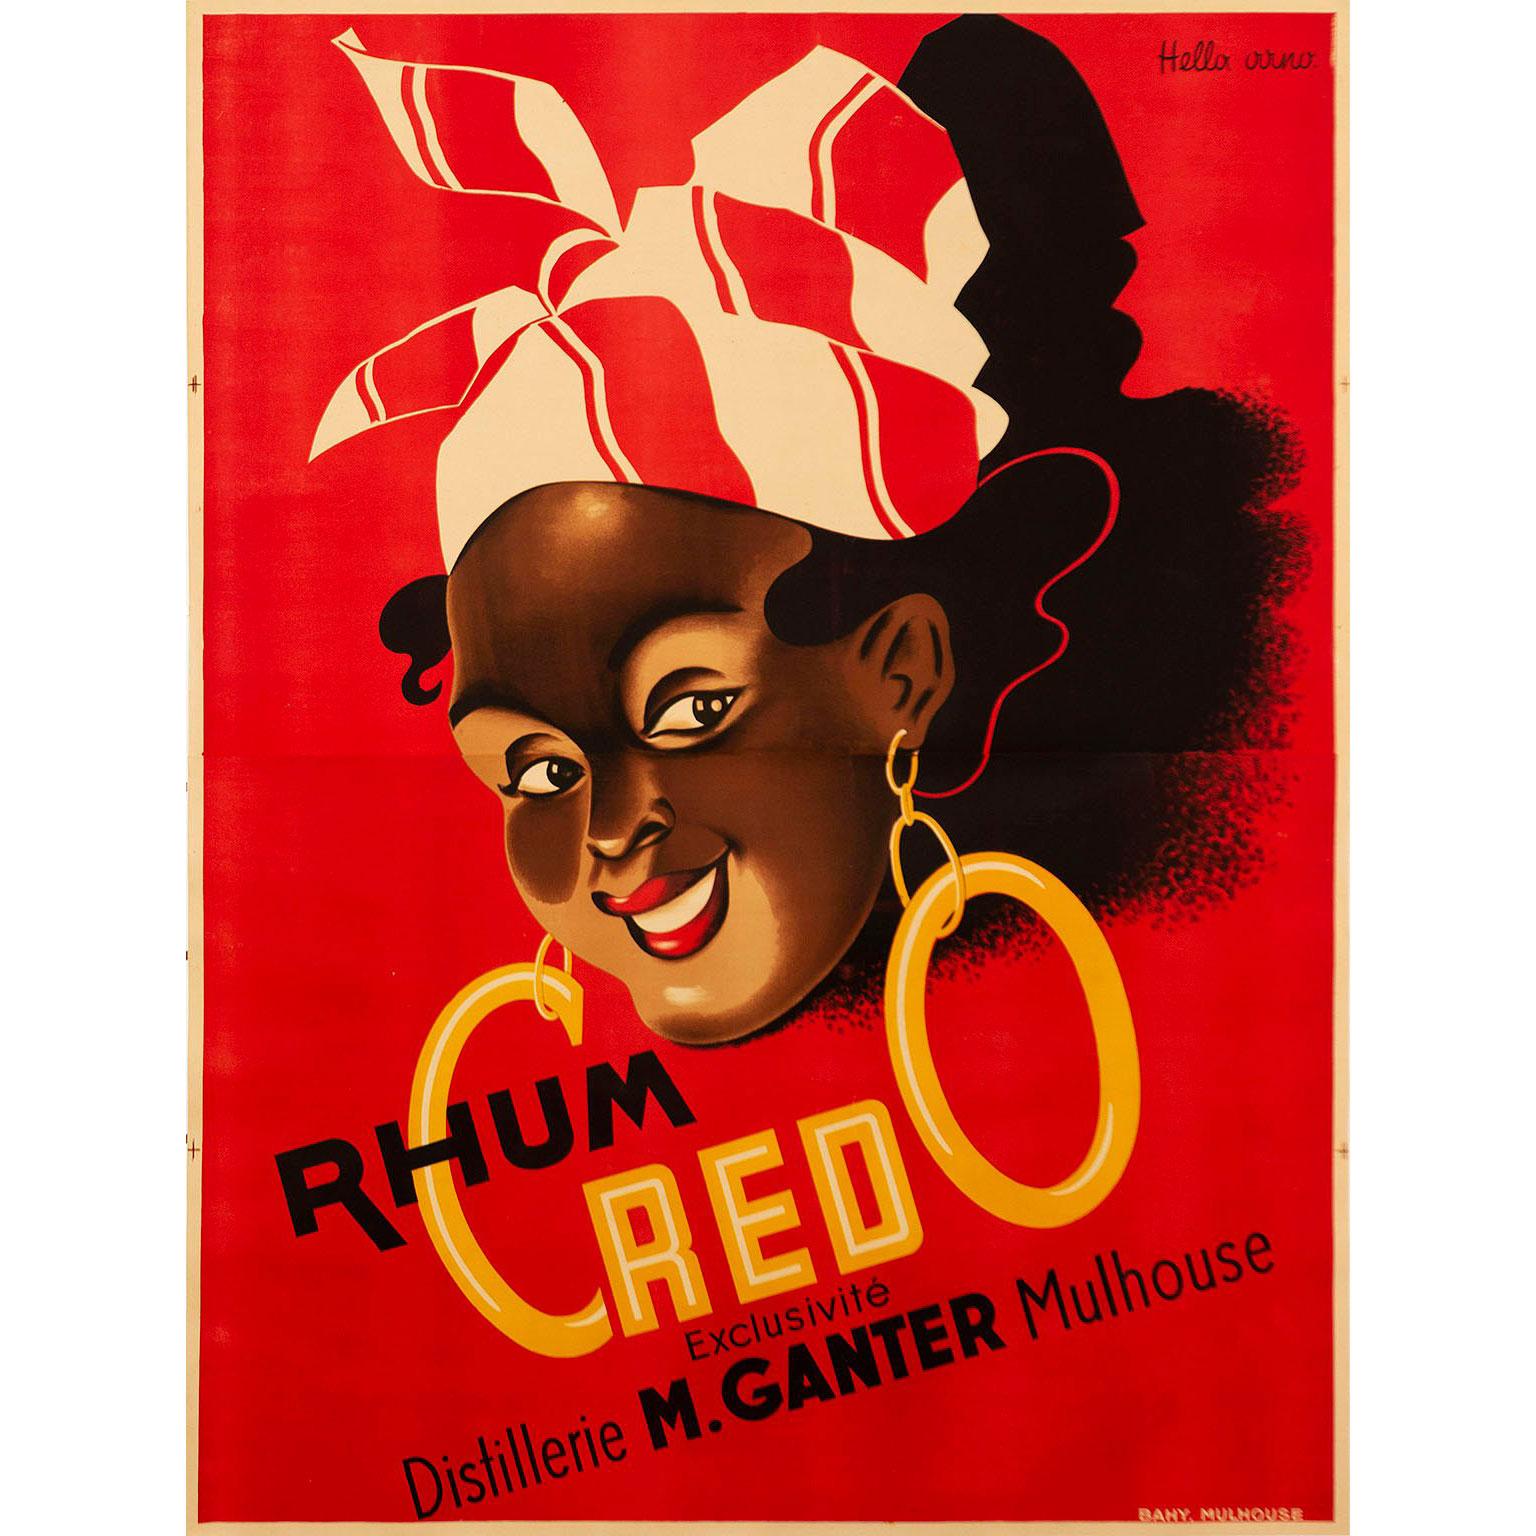 Vintage 1930s Credo Rhum Poster by Hella Arno For Sale